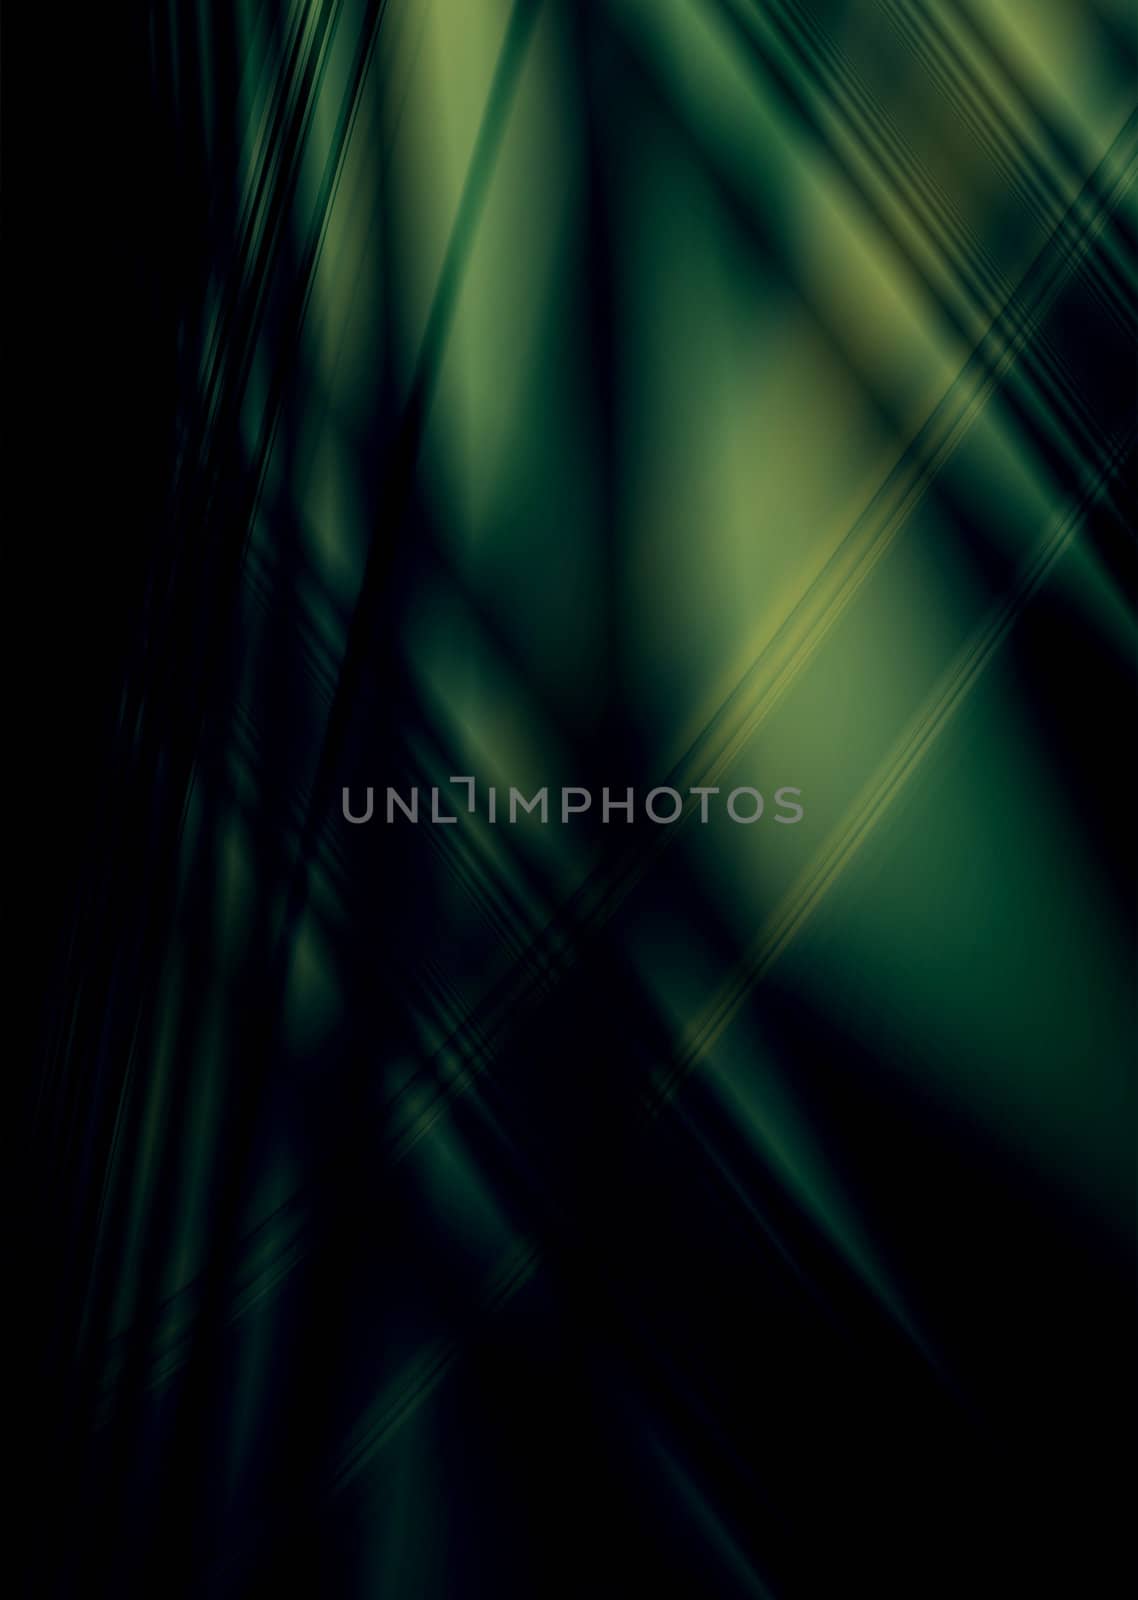 green and black abstract background with copy space